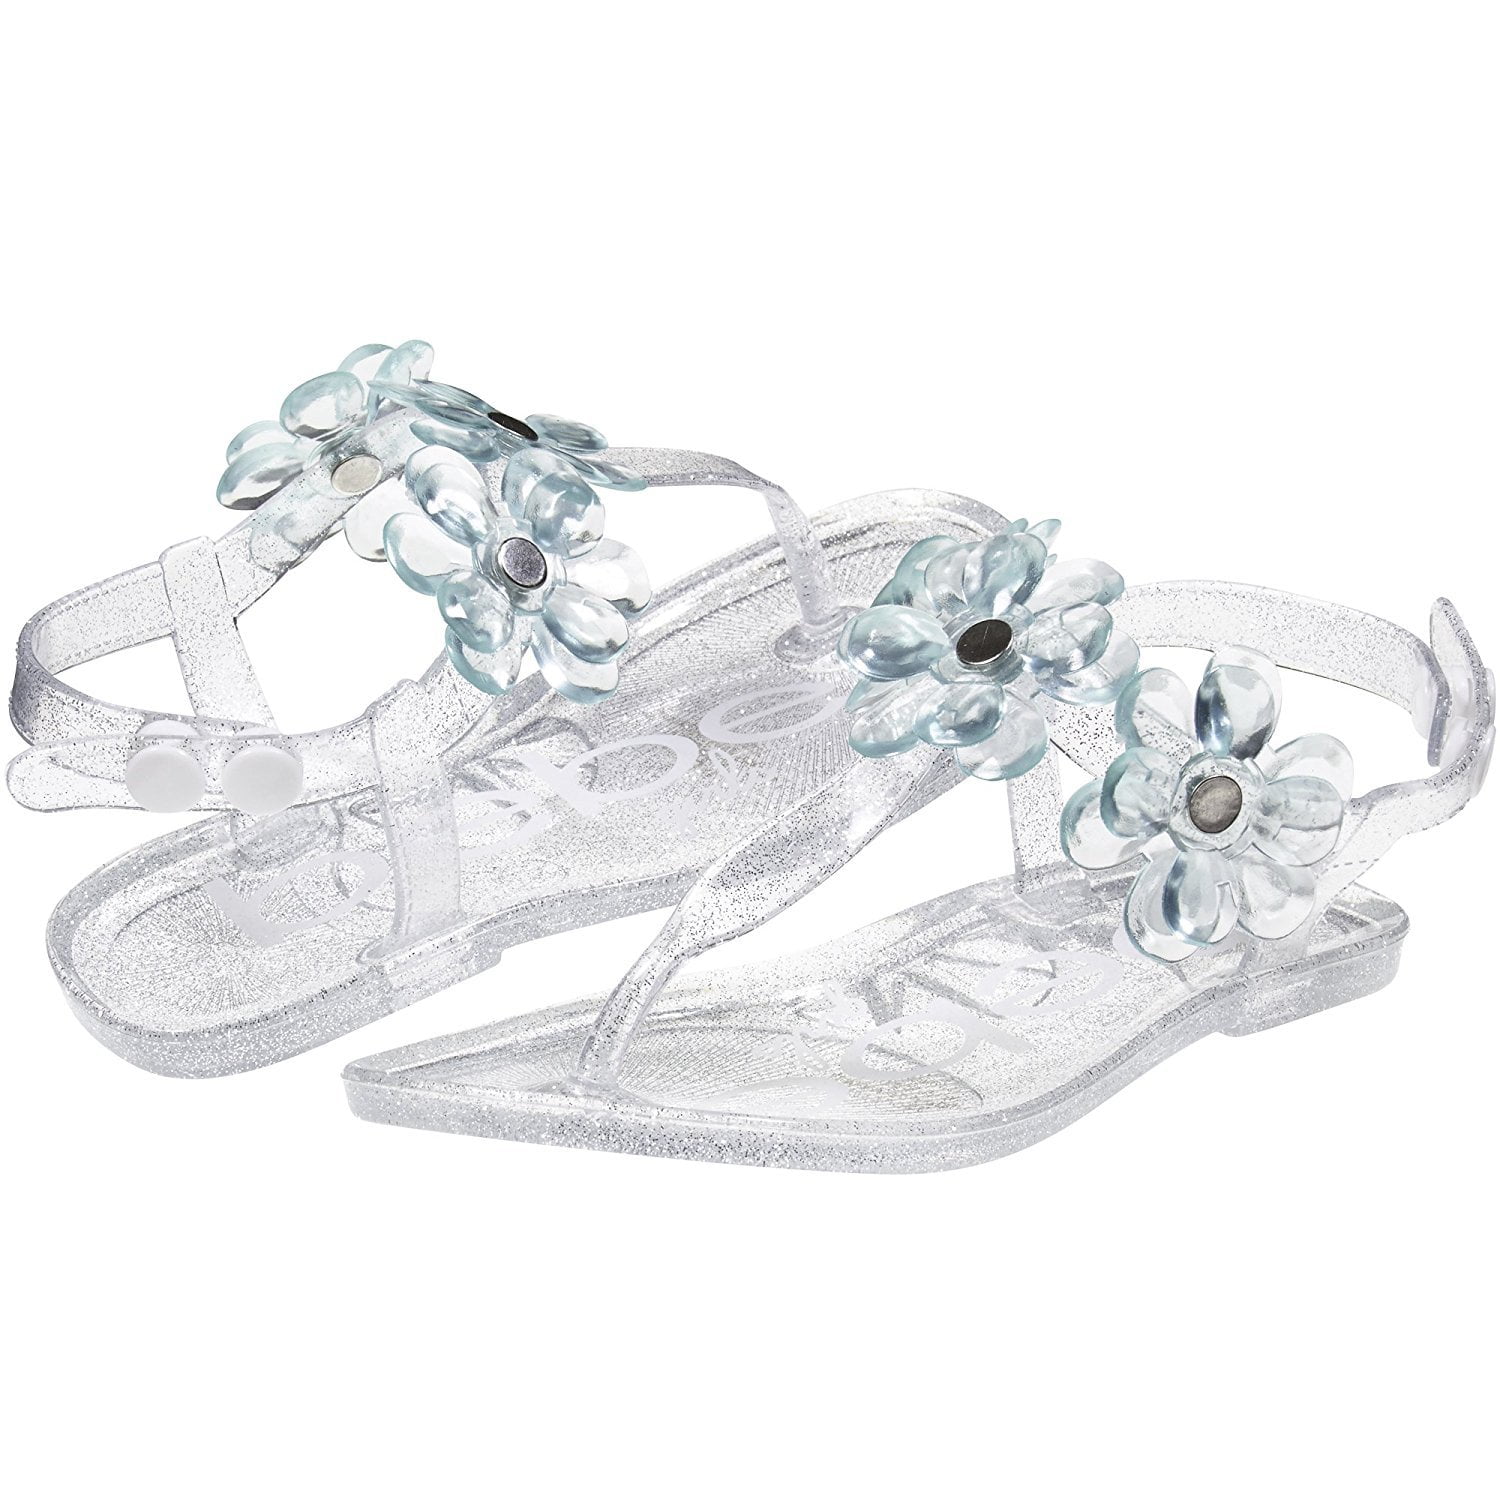 Carter's Toddler Girls Selena Jelly T-Strap Sandals Orange Clear NEW